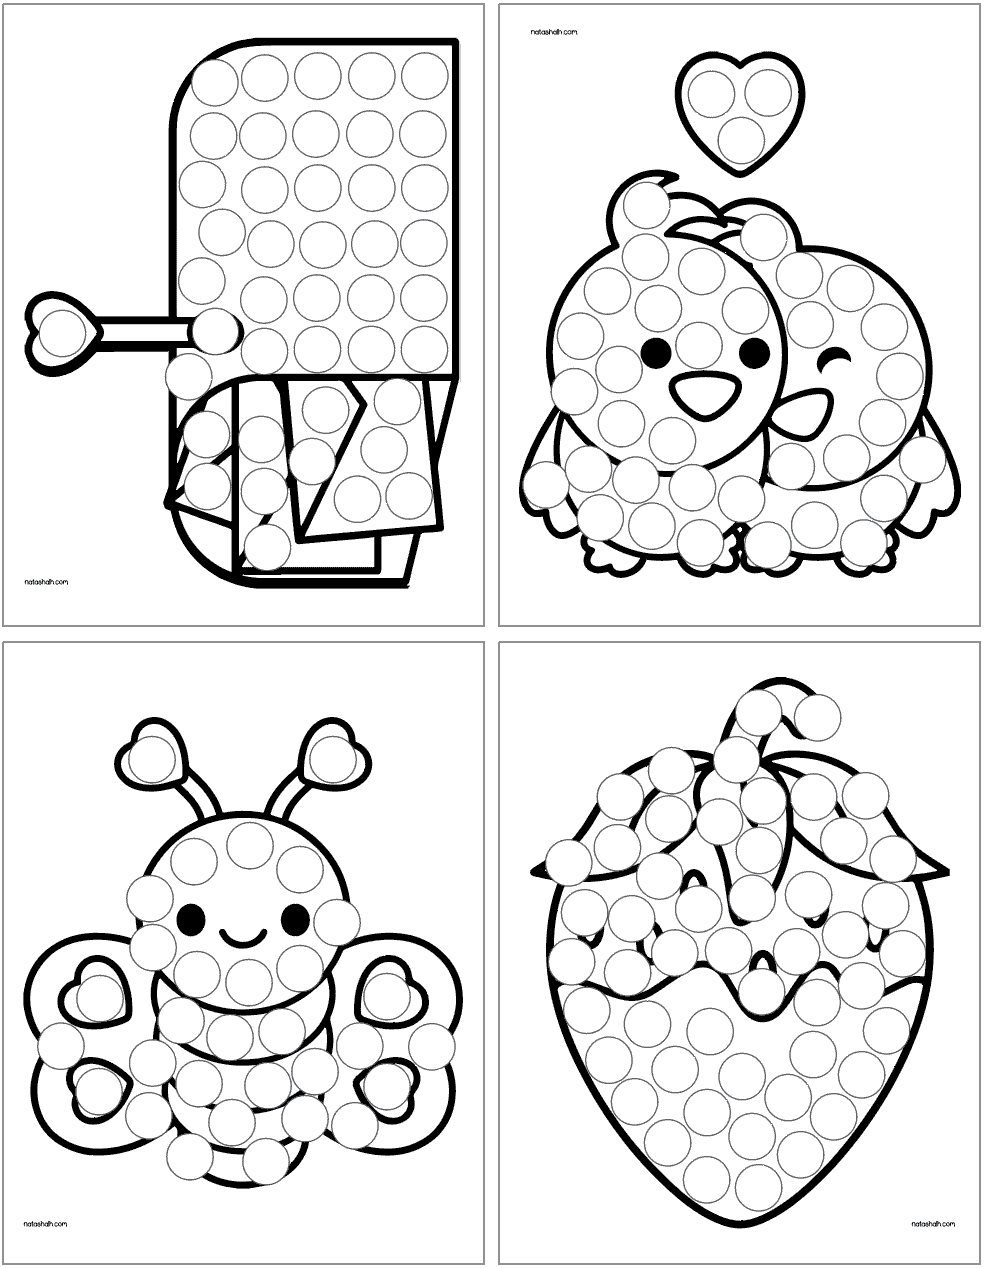 Four dot marker coloring pages for Valentine's Day including: a mailbox, lovebirds, a love bug, and a strawberry